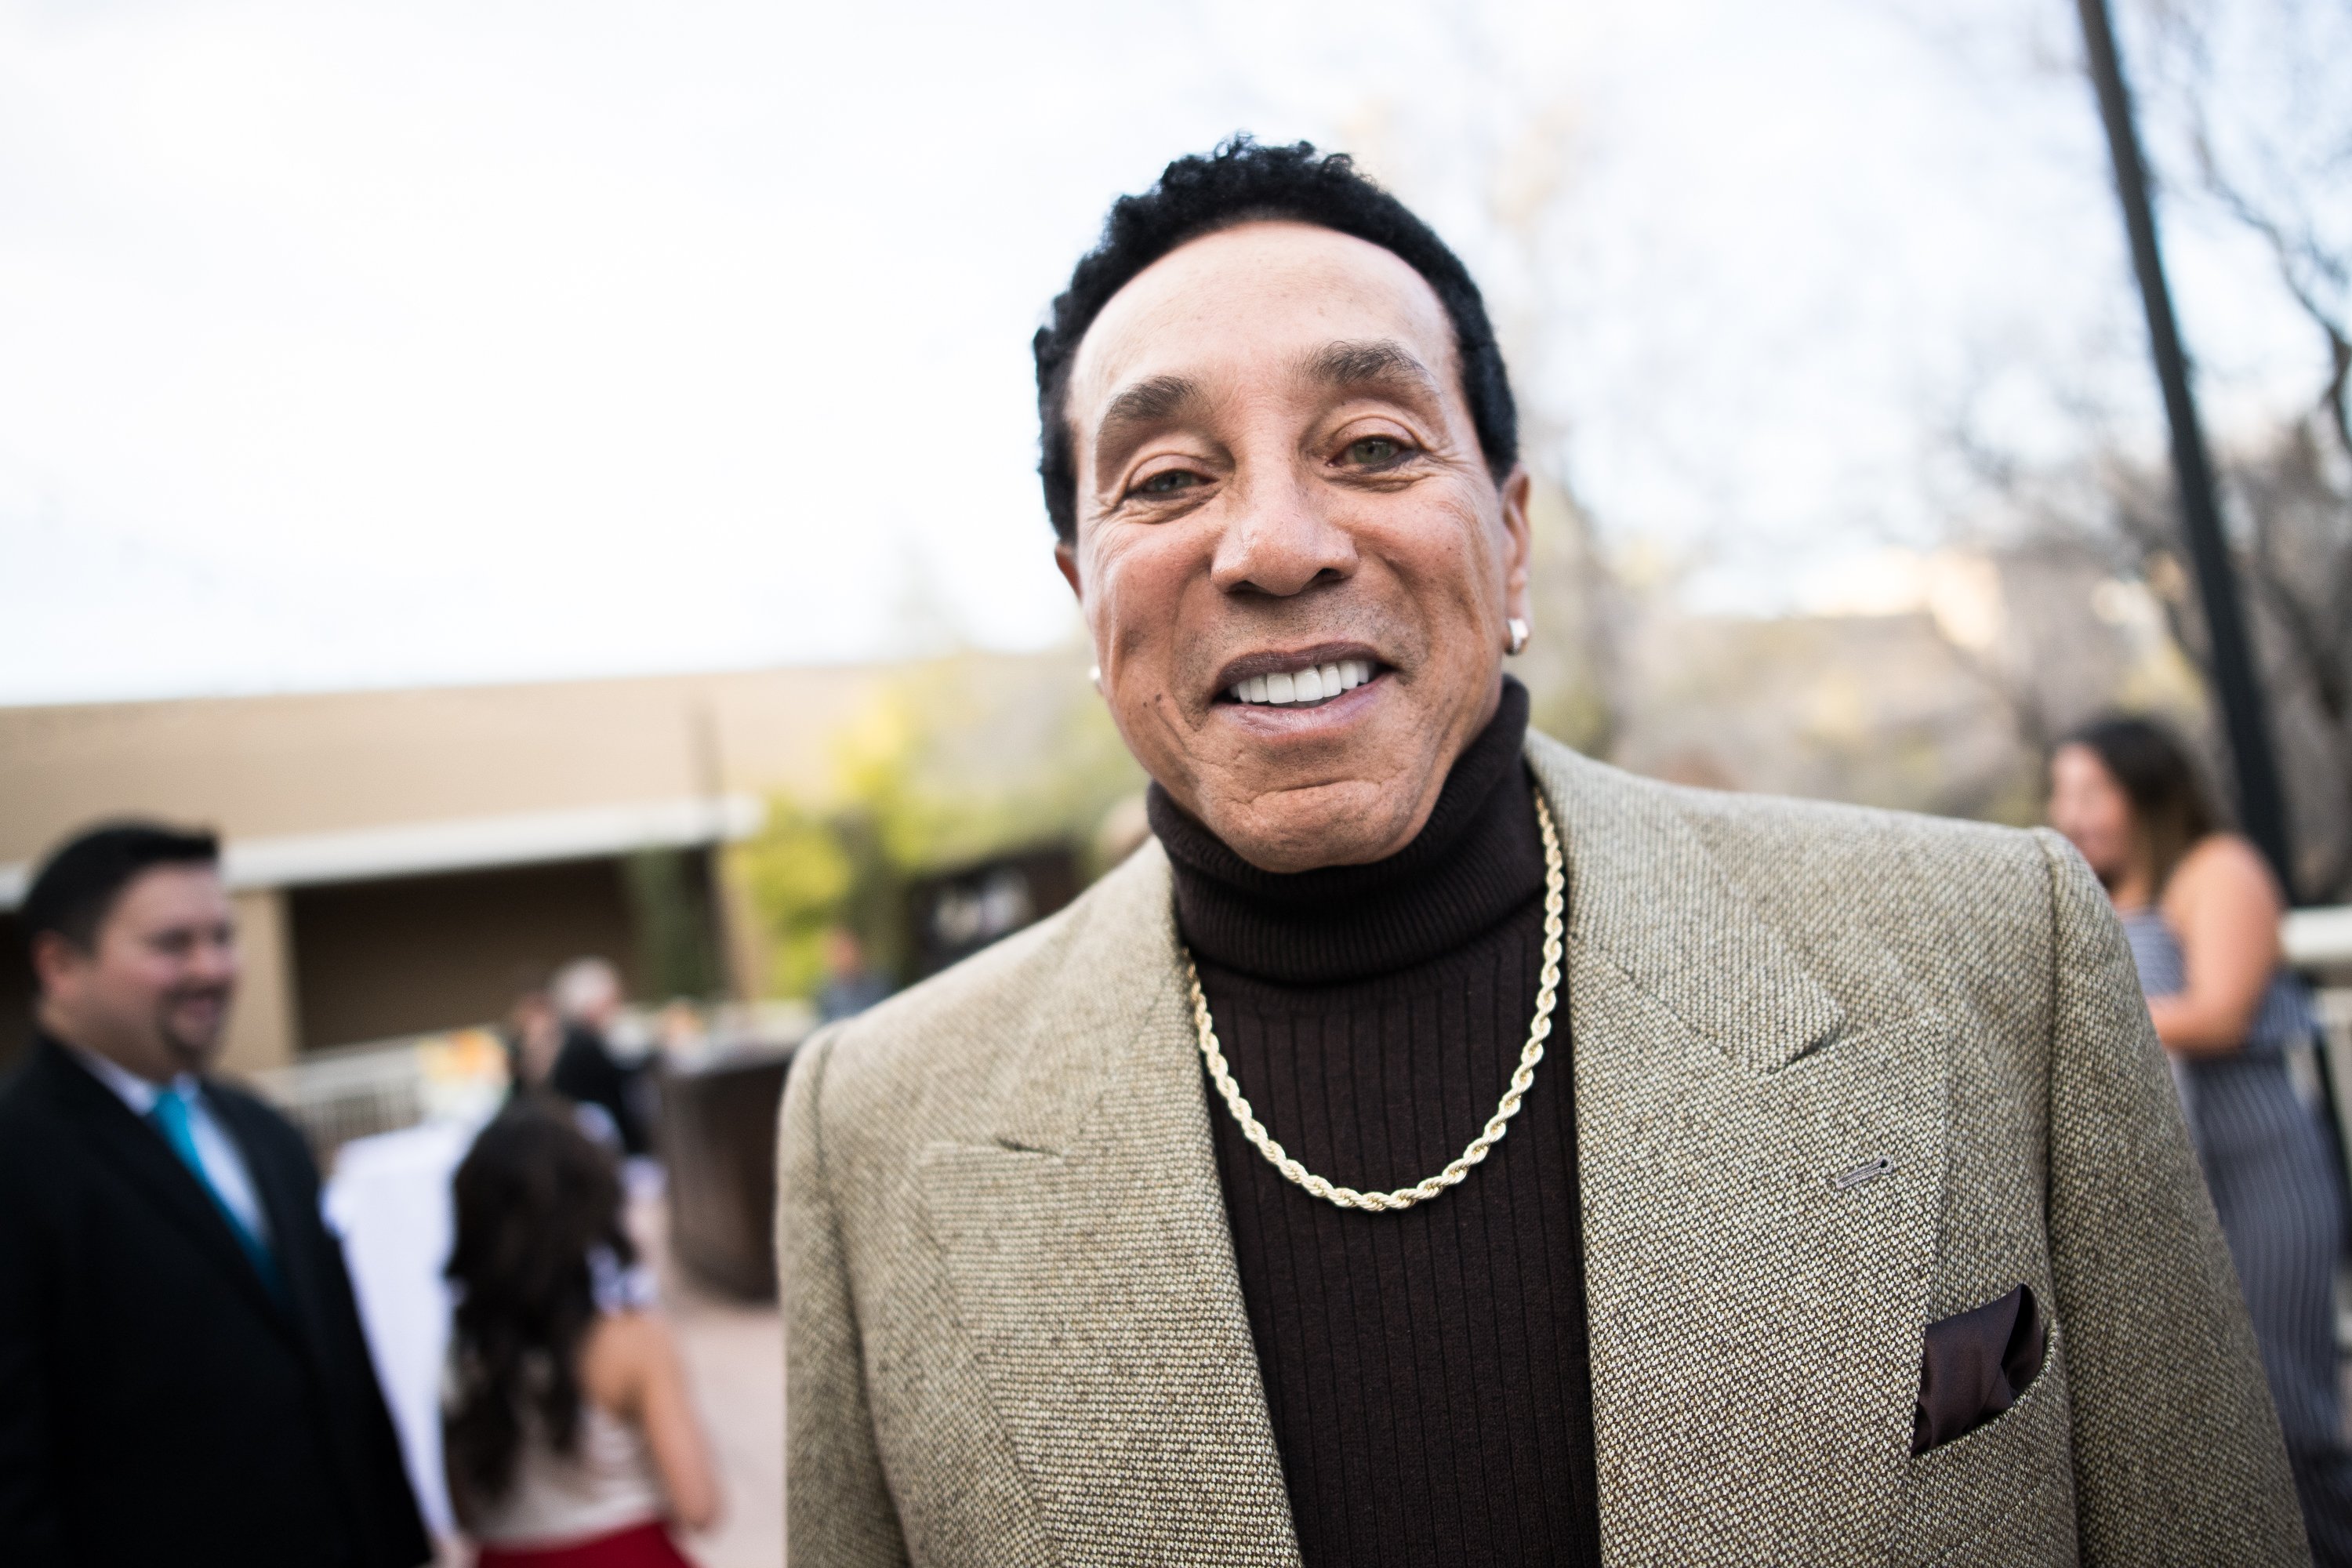 Smokey Robinson attends the Celebrity Fight Night's Founders Club Dinner in Phoenix on March 9, 2018. | Photo: Getty Images